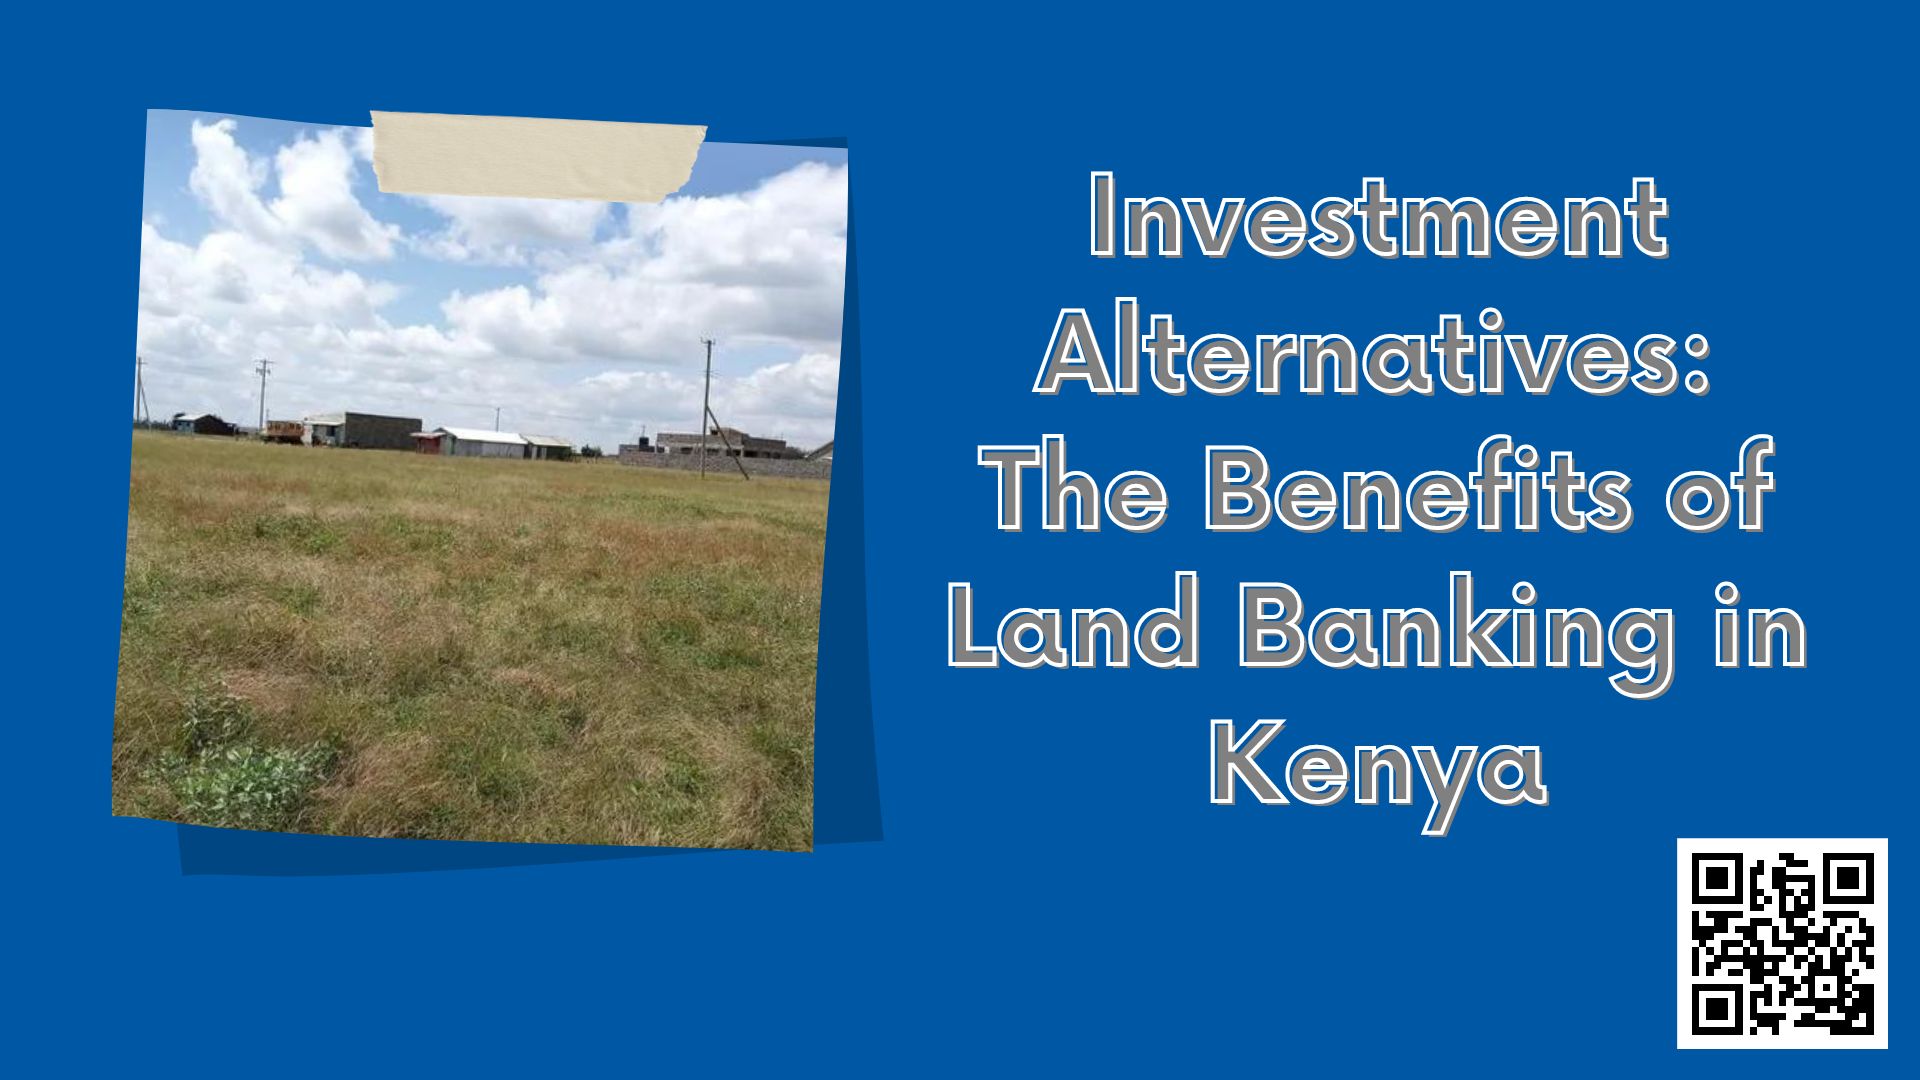 Investment Alternatives: The Benefits of Land Banking in Kenya